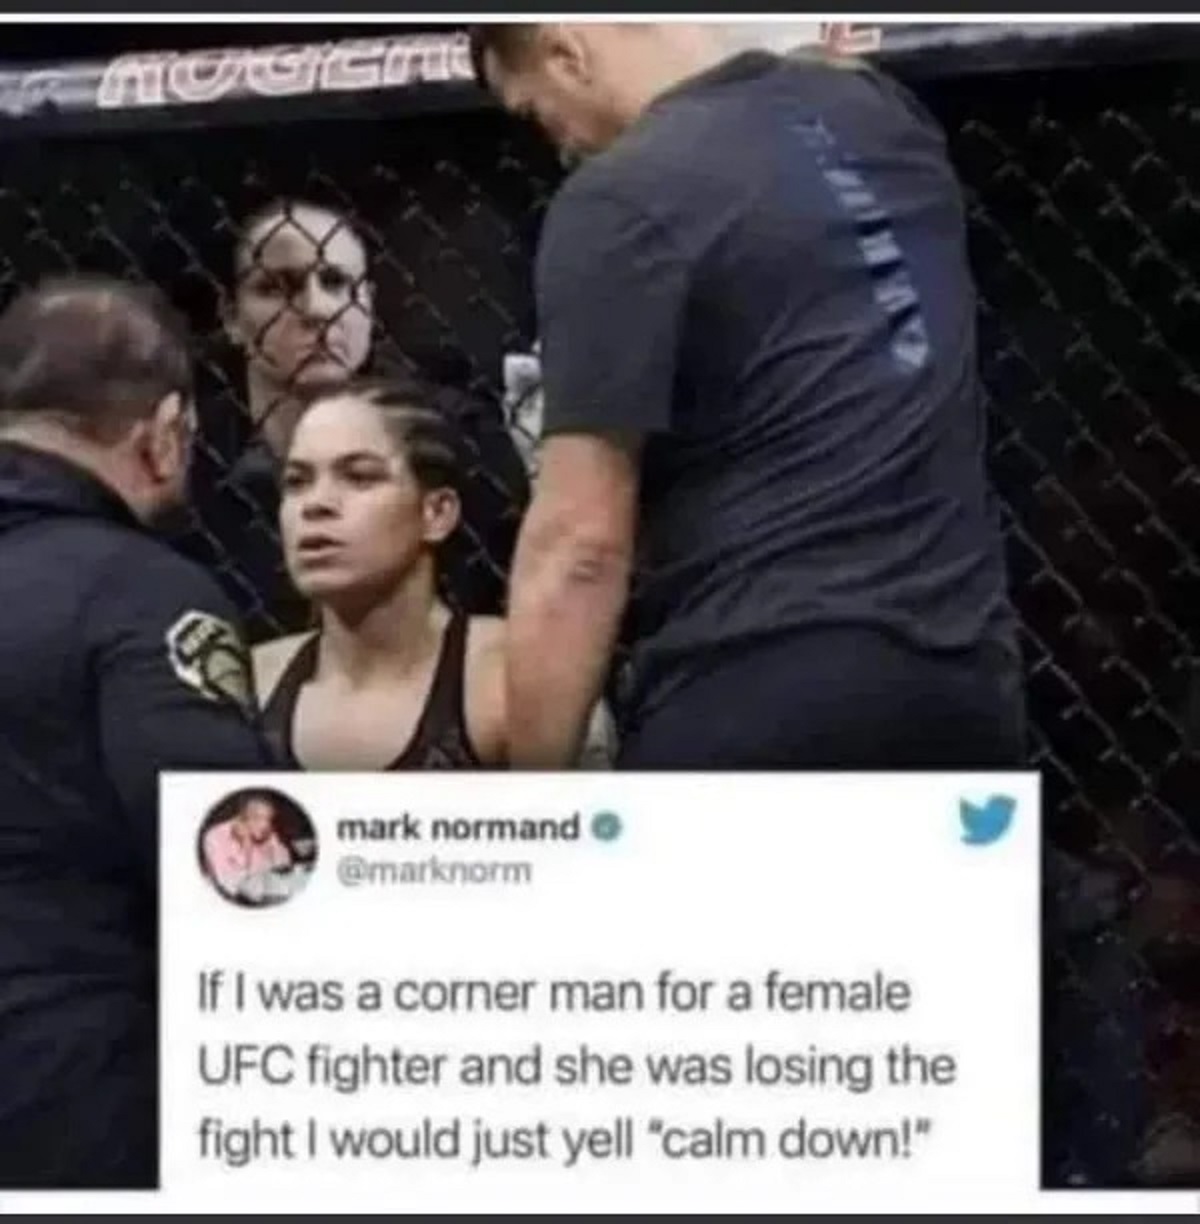 photo caption - Nogga lo mark normand If I was a corner man for a female Ufc fighter and she was losing the fight I would just yell "calm down!"